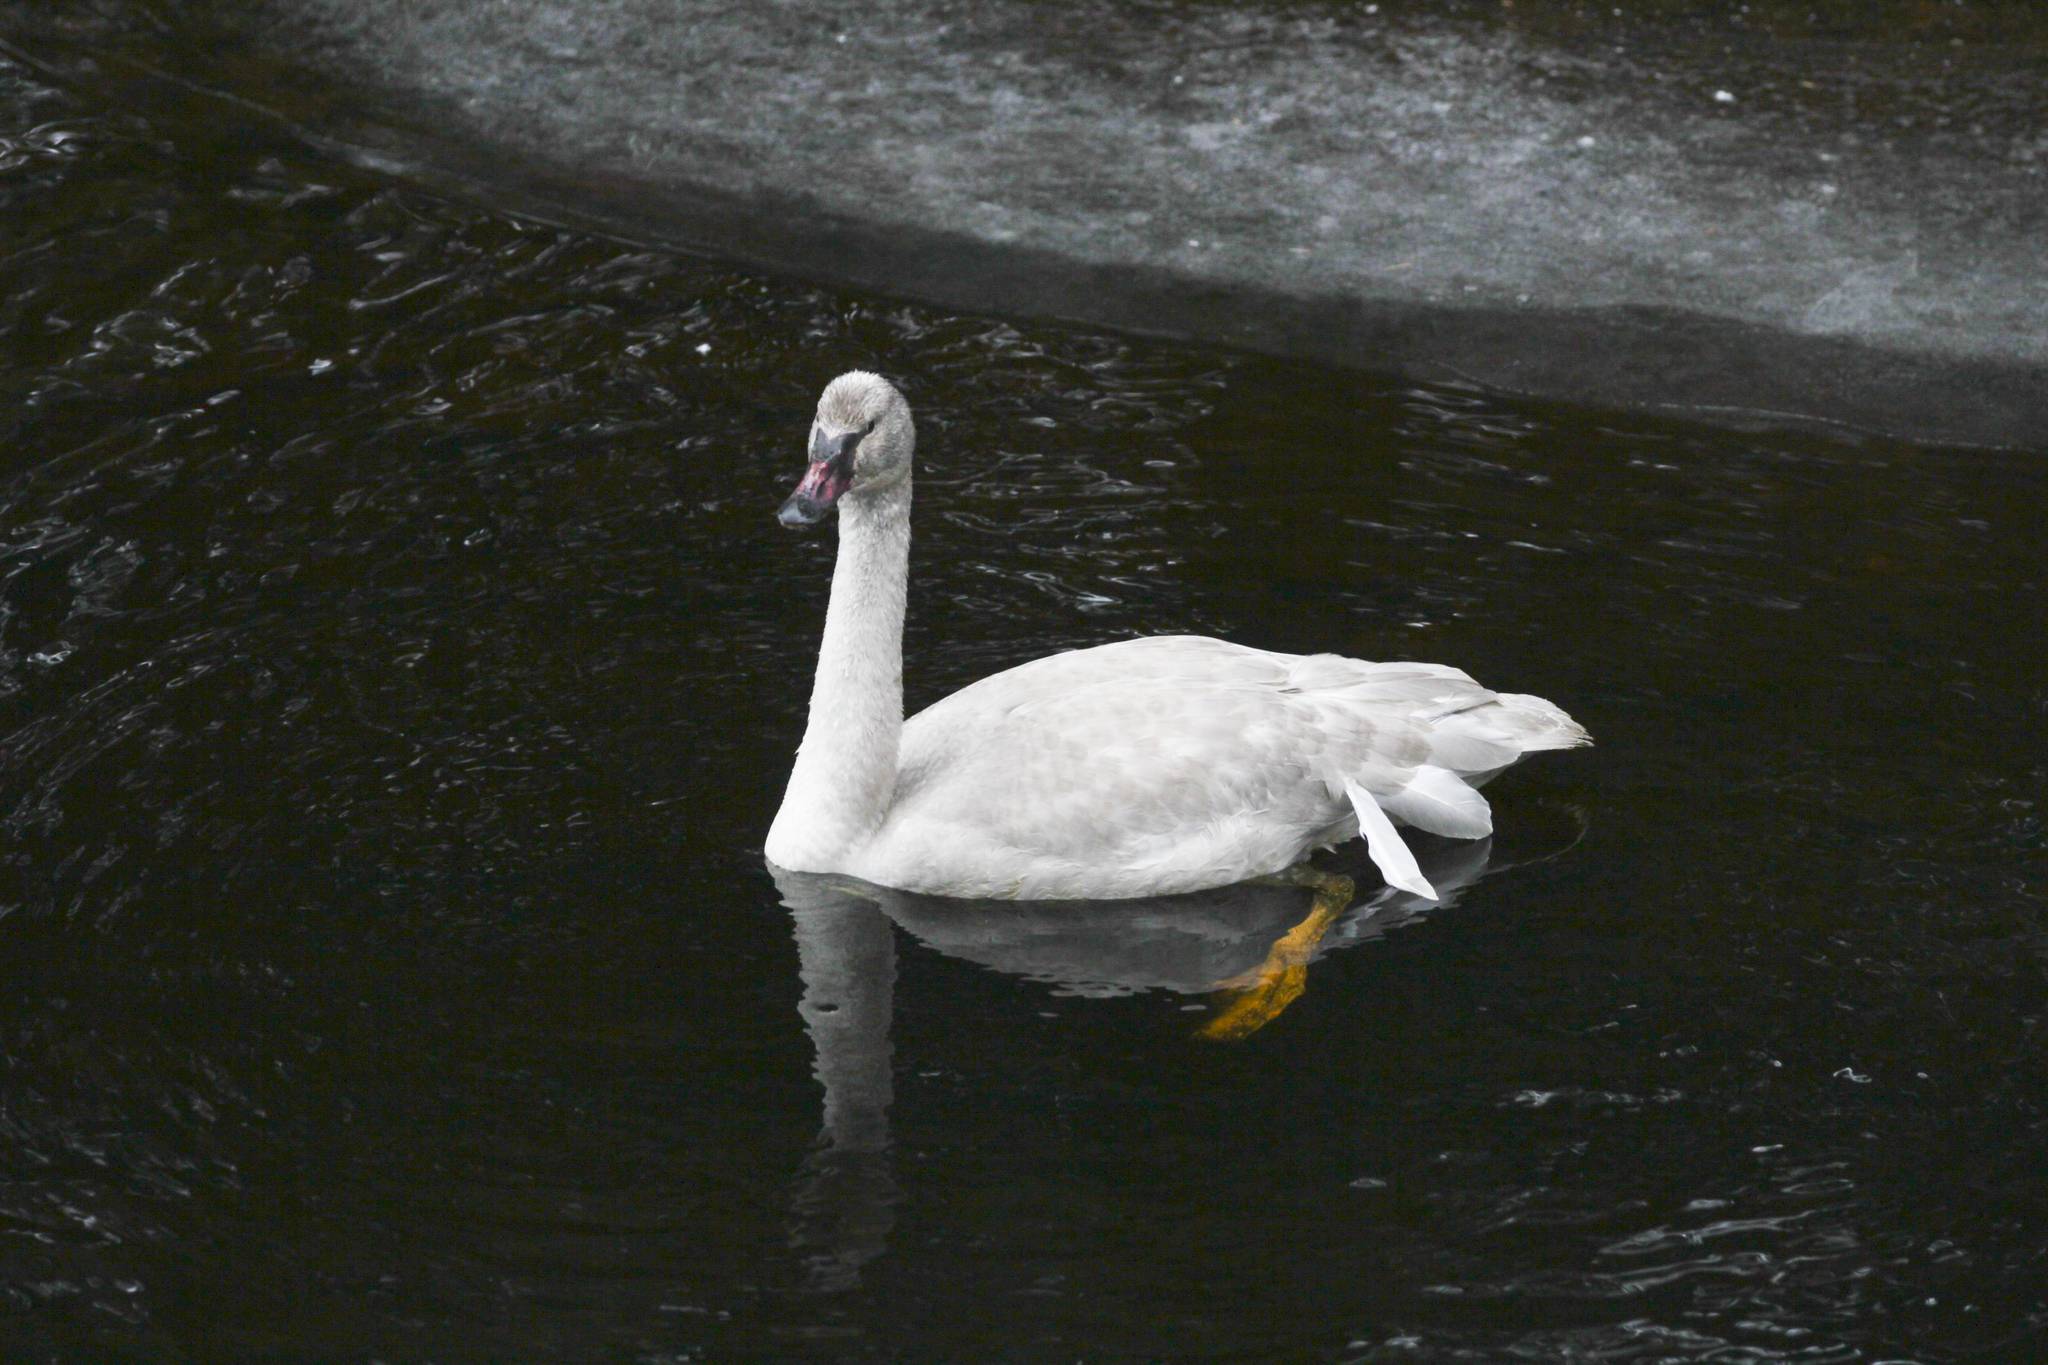 Members of the Juneau Raptor Center attempt to capture a trumpeter swan with an injured wing at Auke Lake on Jan. 28, 2021. (Michael S. Lockett / Juneau Empire)